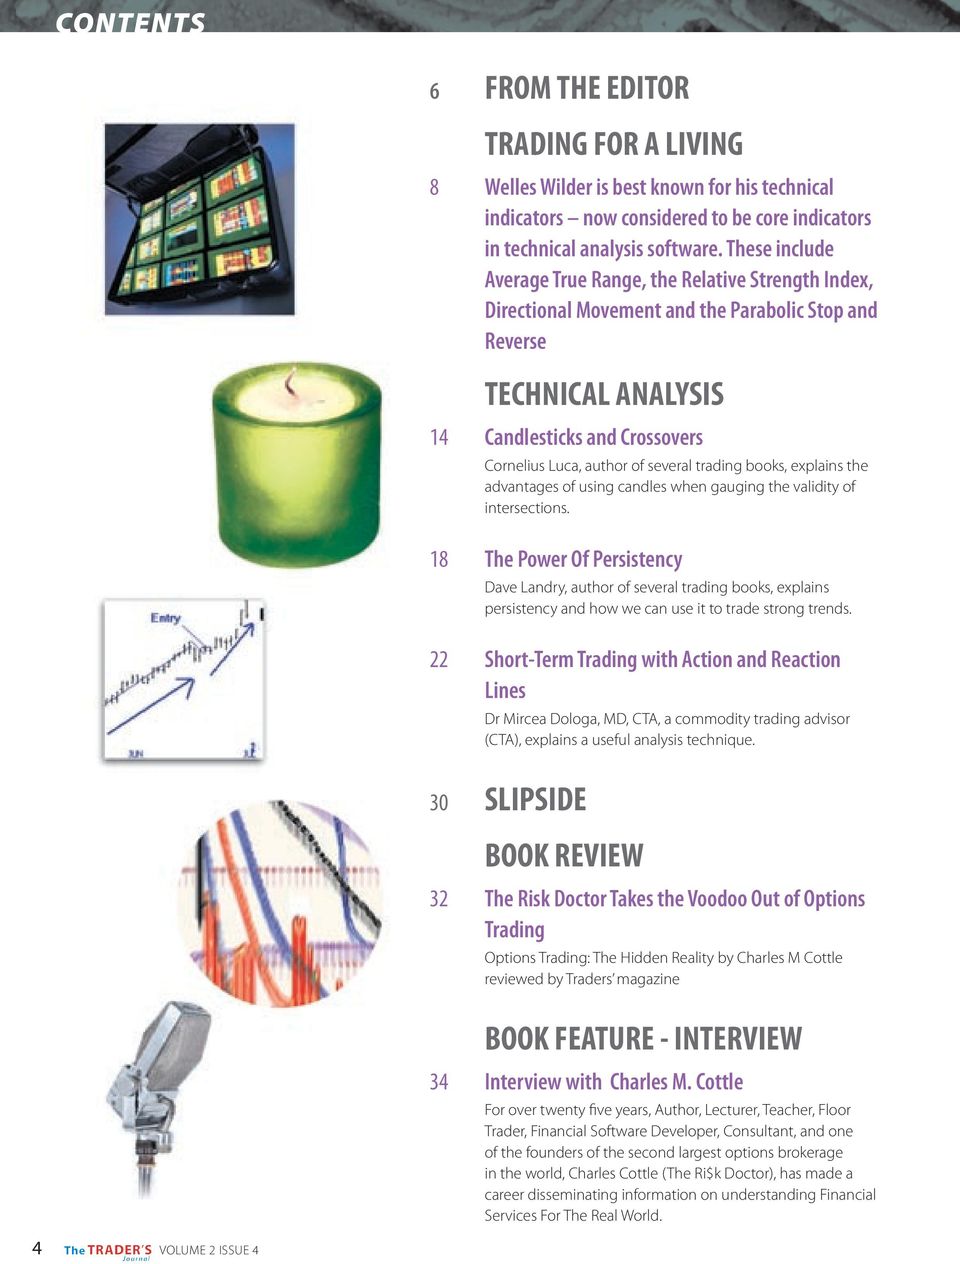 several trading books, explains the advantages of using candles when gauging the validity of intersections.